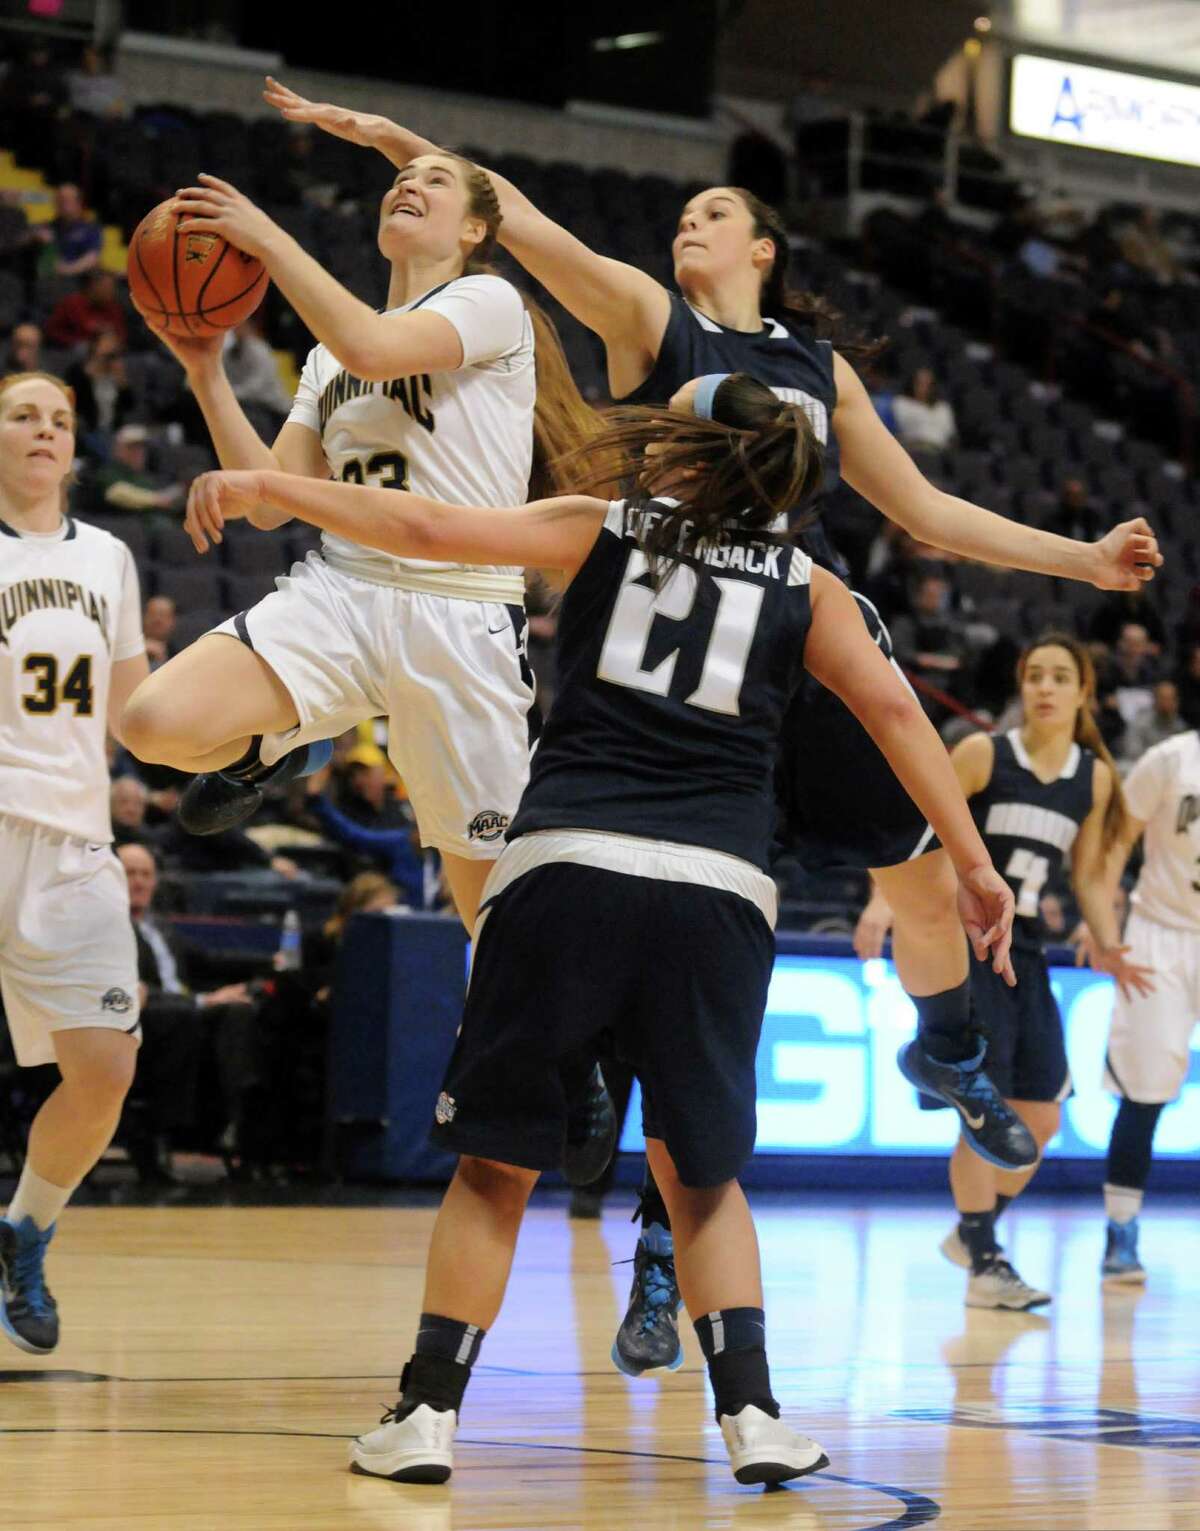 Quinnipiac's Nickoline Ostergaad drives to the basket during their Women's MAAC Championship quarterfinals game against Monmouth at the Times Union Center on Friday March 6, 2015 in Albany, N.Y. (Michael P. Farrell/Times Union)